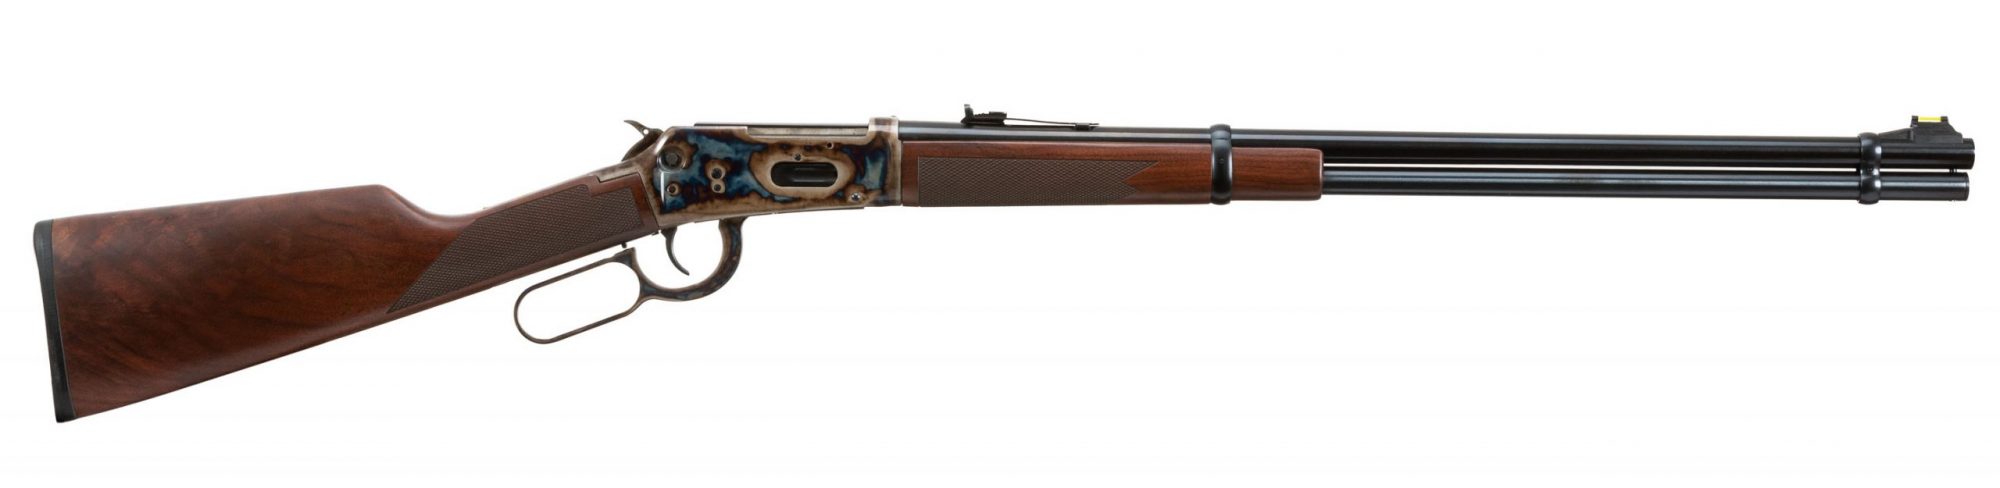 Photo of a Turnbull-finished Winchester Model 9410, for sale by Turnbull Restoration of Bloomfield, NY